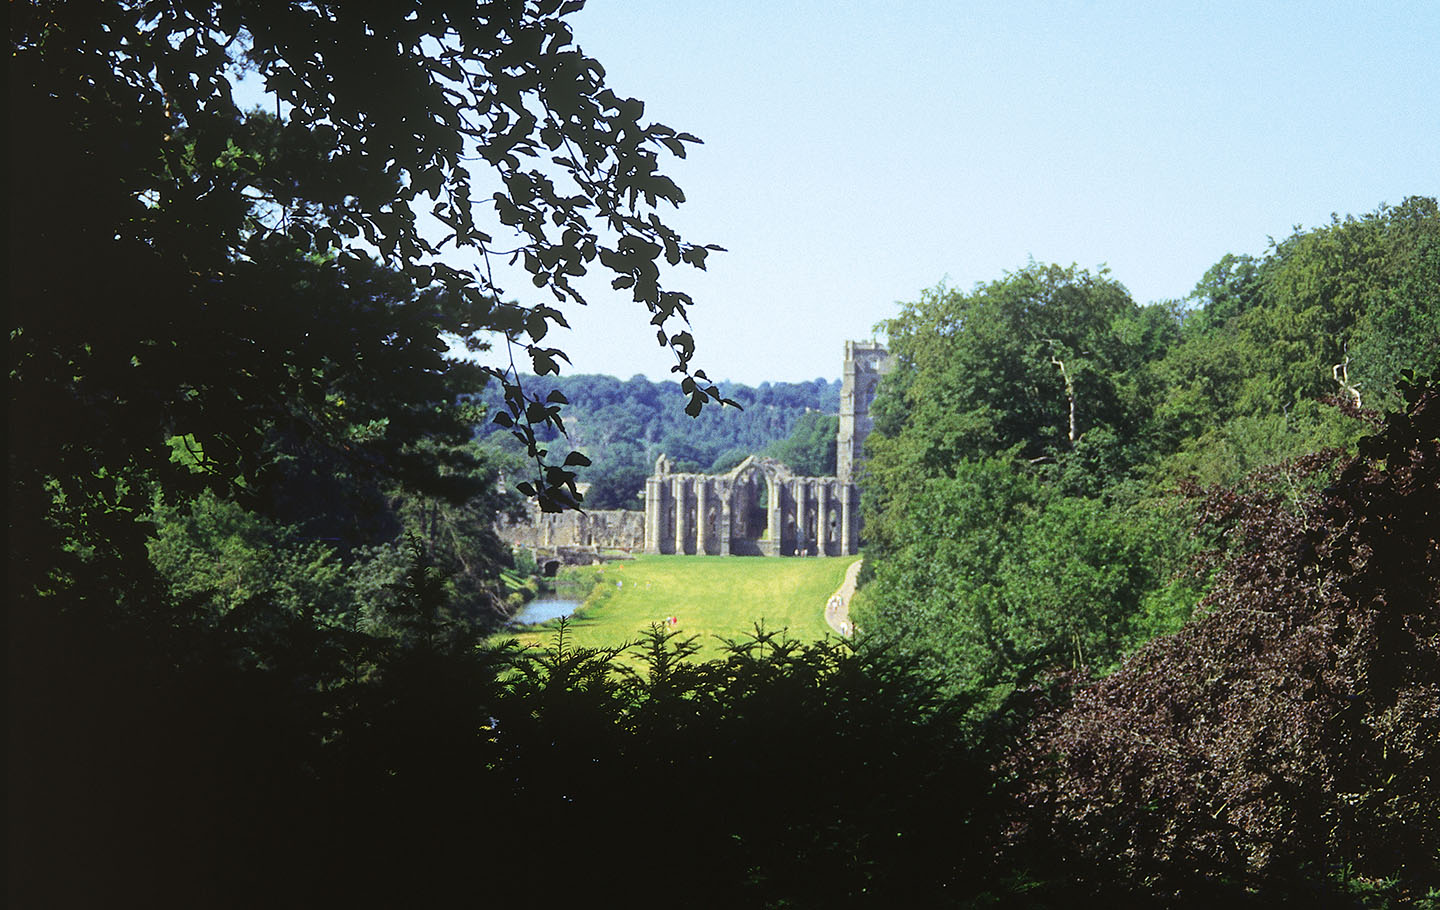 The ruins of Fountain Abbey as seen from the gardens of Studley Royal